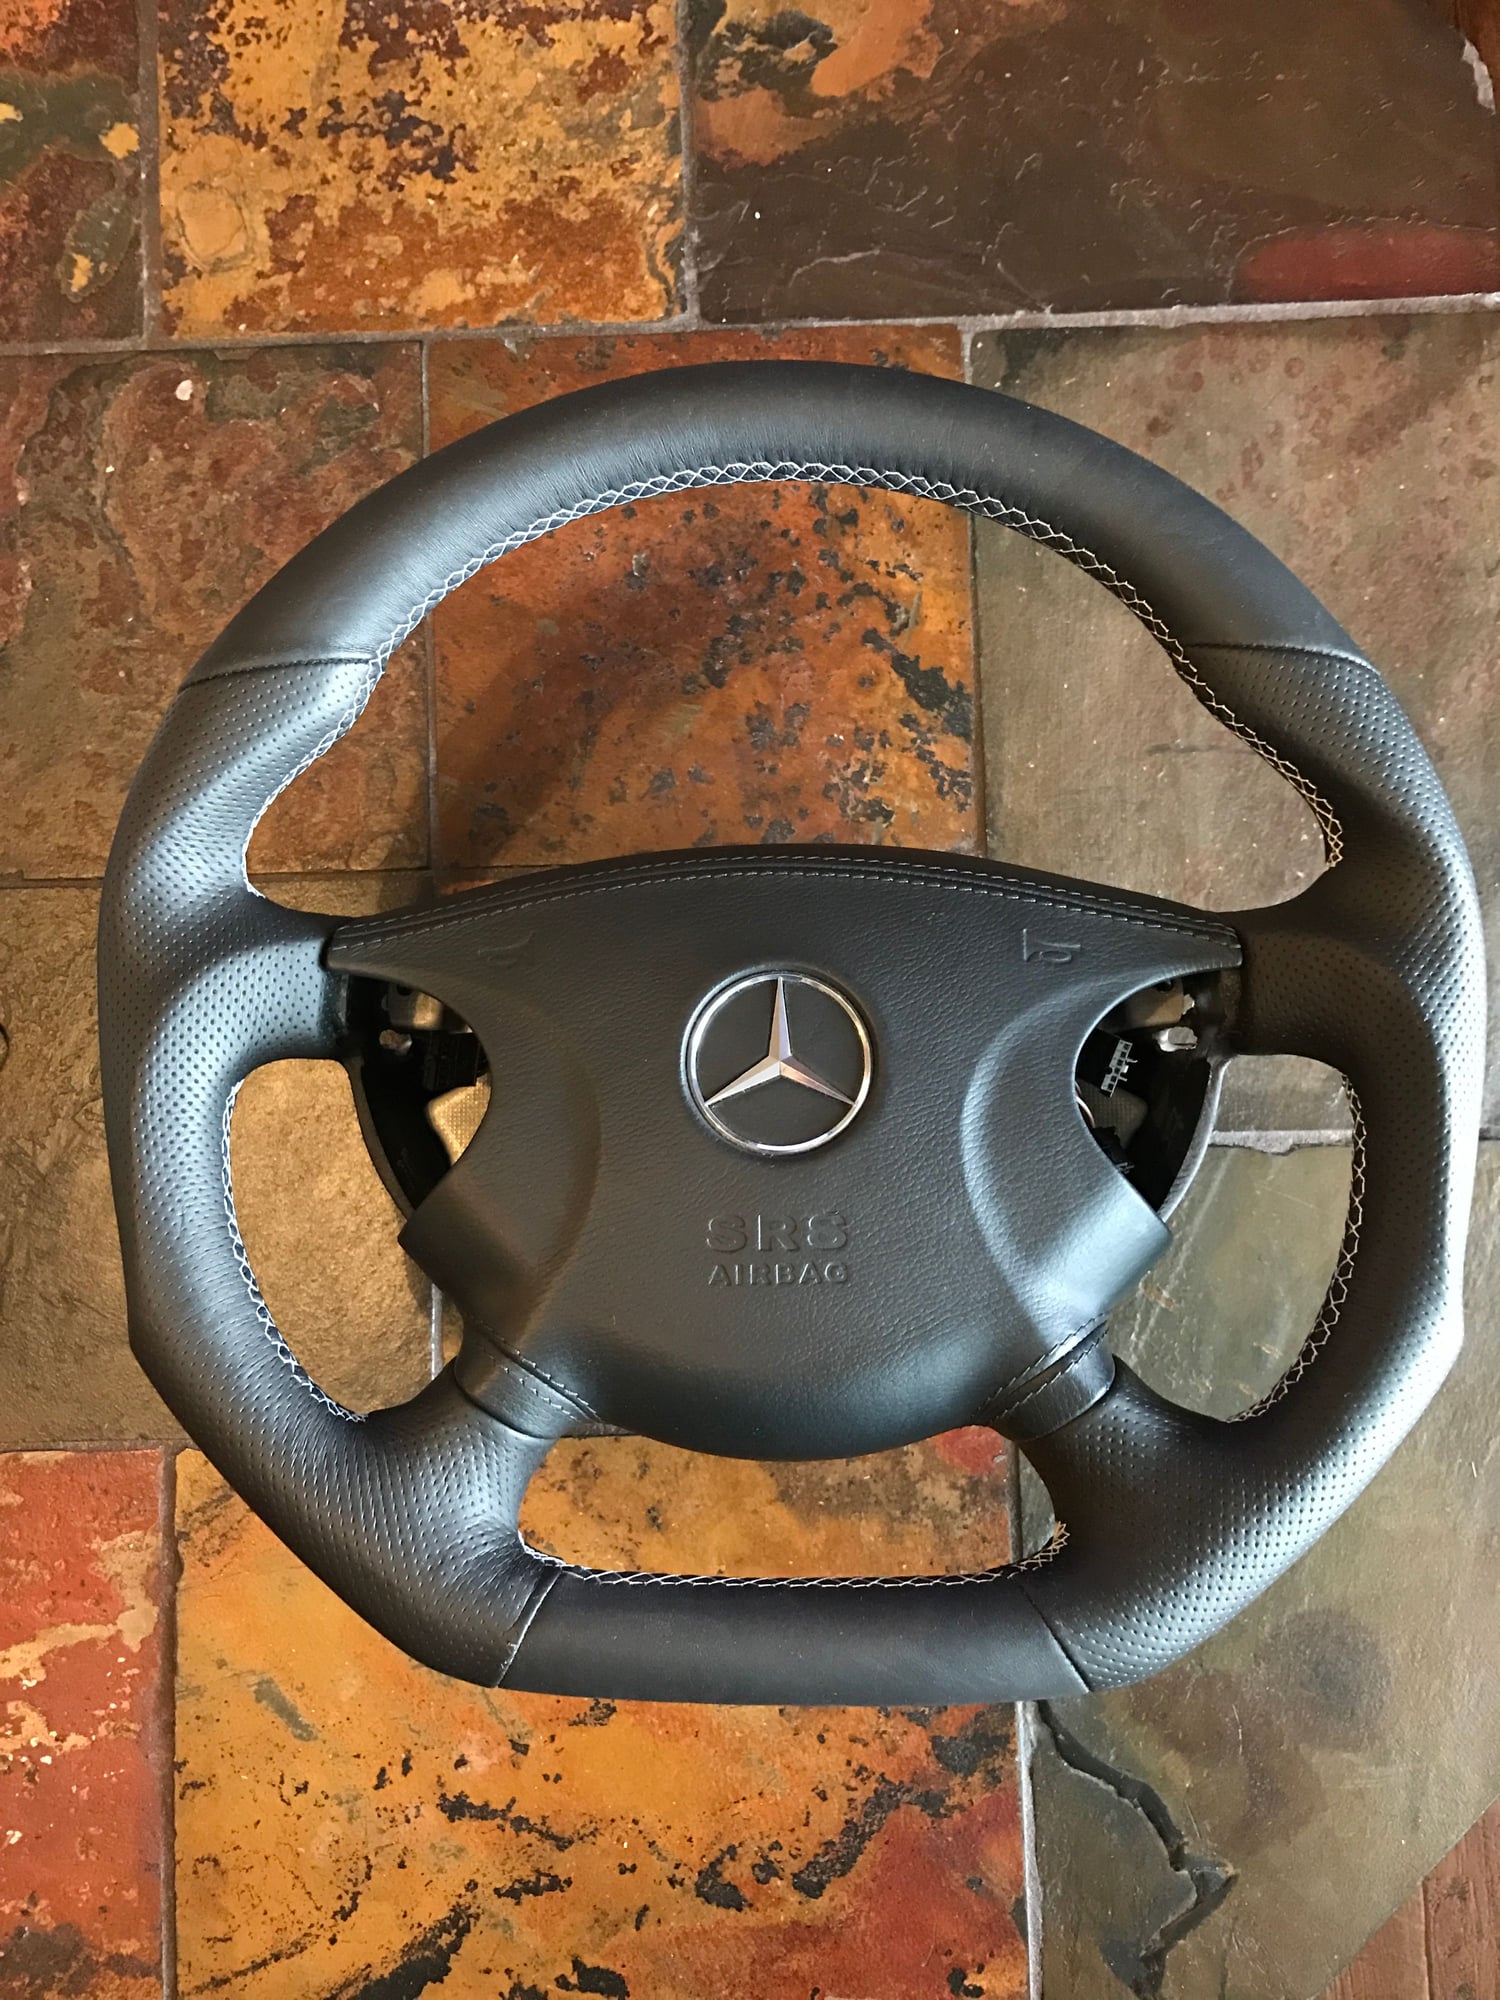 Interior/Upholstery - W211 Flat Bottom Steering Wheel with Leather Air Bag - New - 2005 to 2006 Mercedes-Benz E55 AMG - Sterling, VA 20165, United States